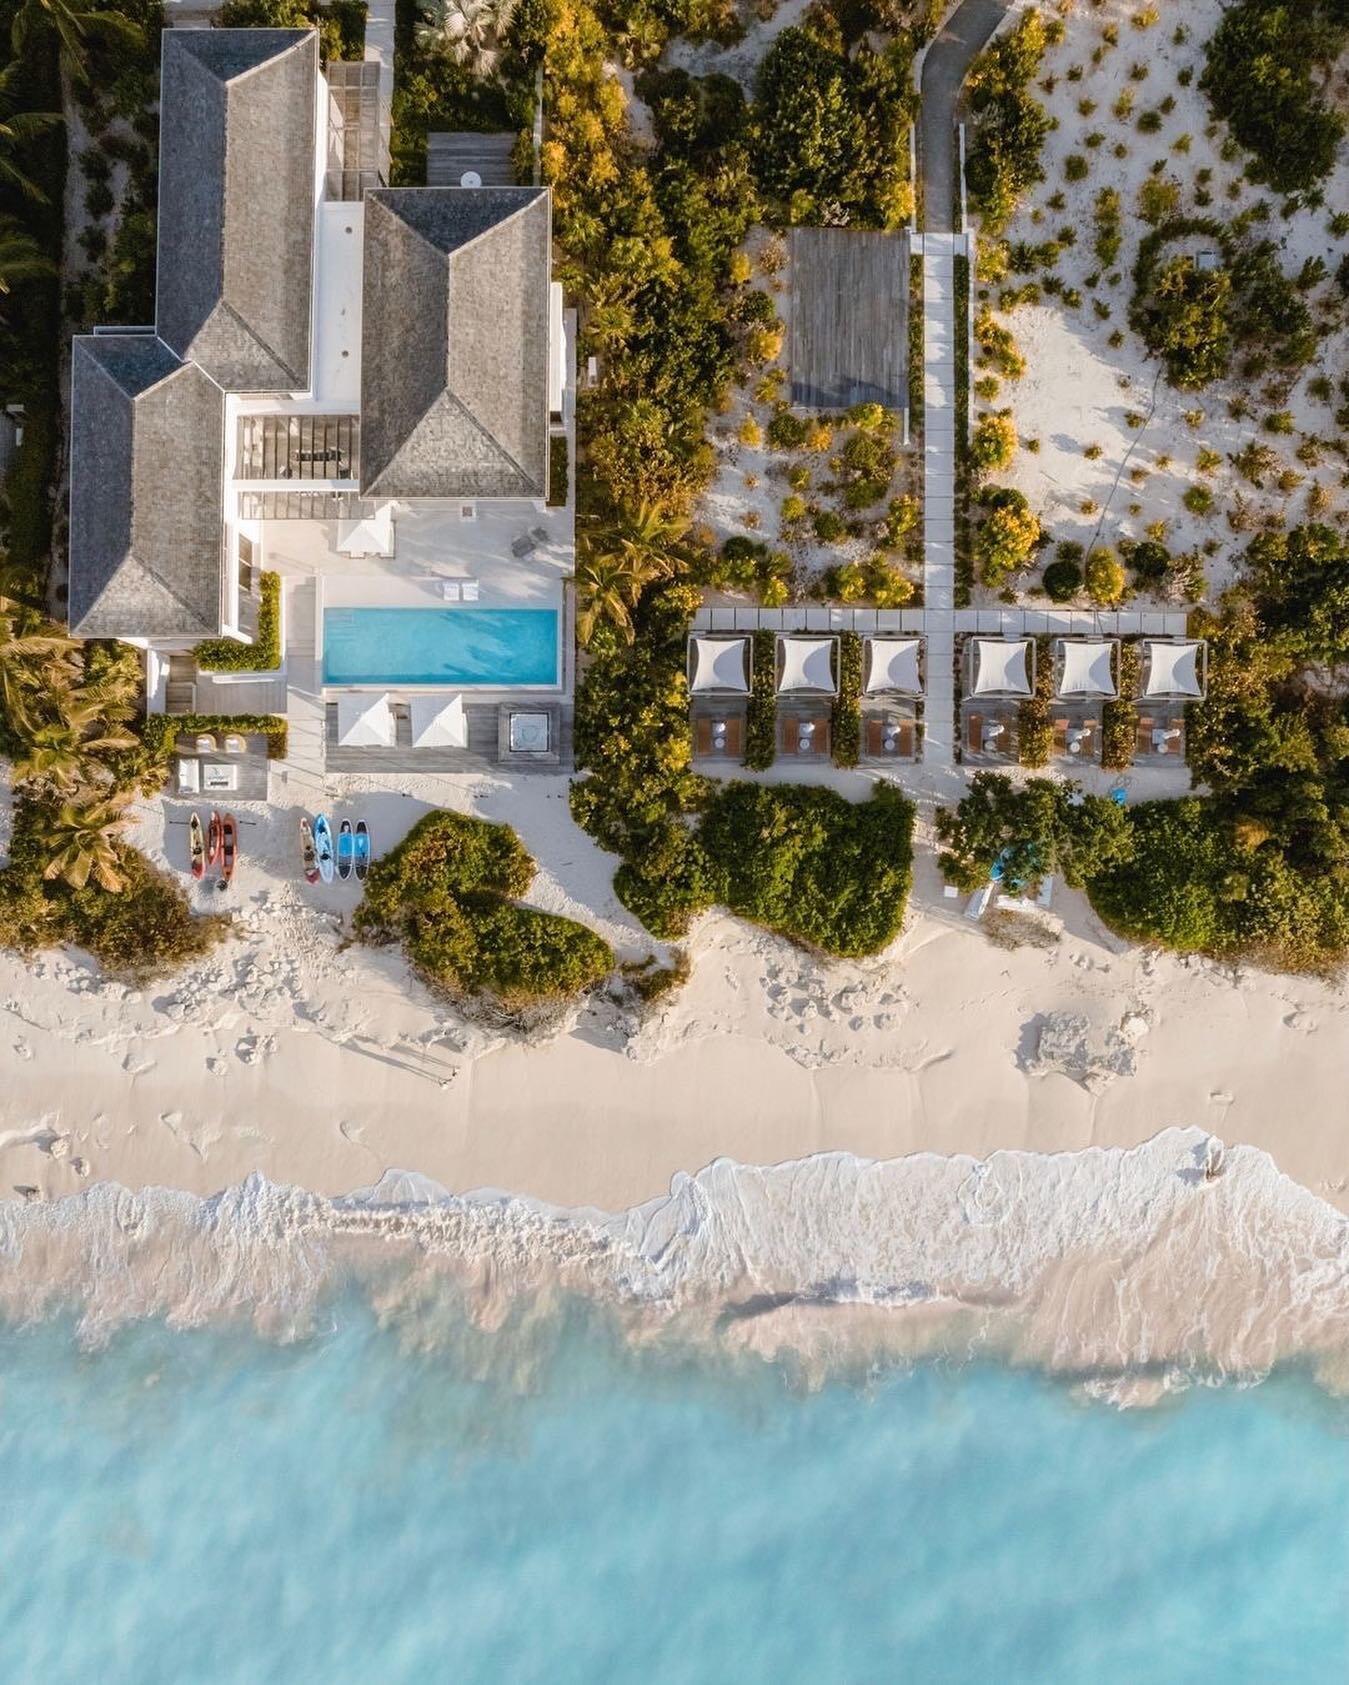 Places worth discovering and staying to explore @beachenclave 

#turksandcaicos #beachgetaway #islandvibes